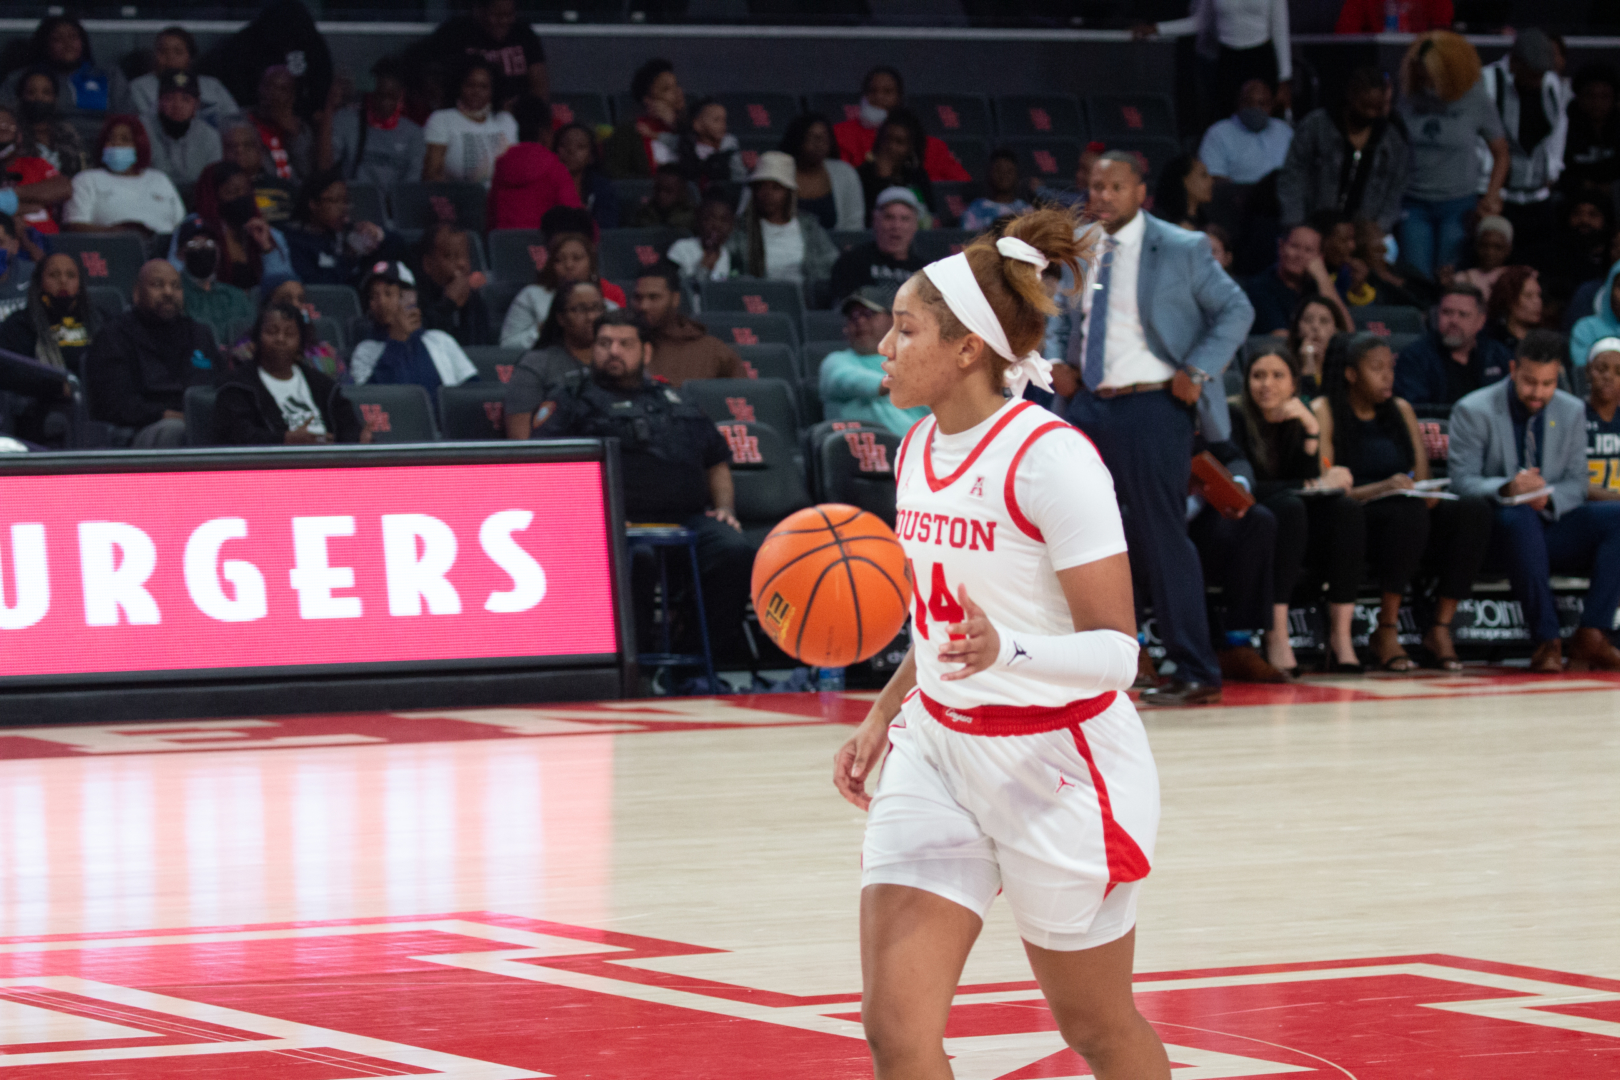 Sophomore guard Laila Blair scored a team-high 20 points to go along with six assists and six rebounds in UH women's basketball's victory over Florida State on Thursday night. | Esther Umoh/The Cougar